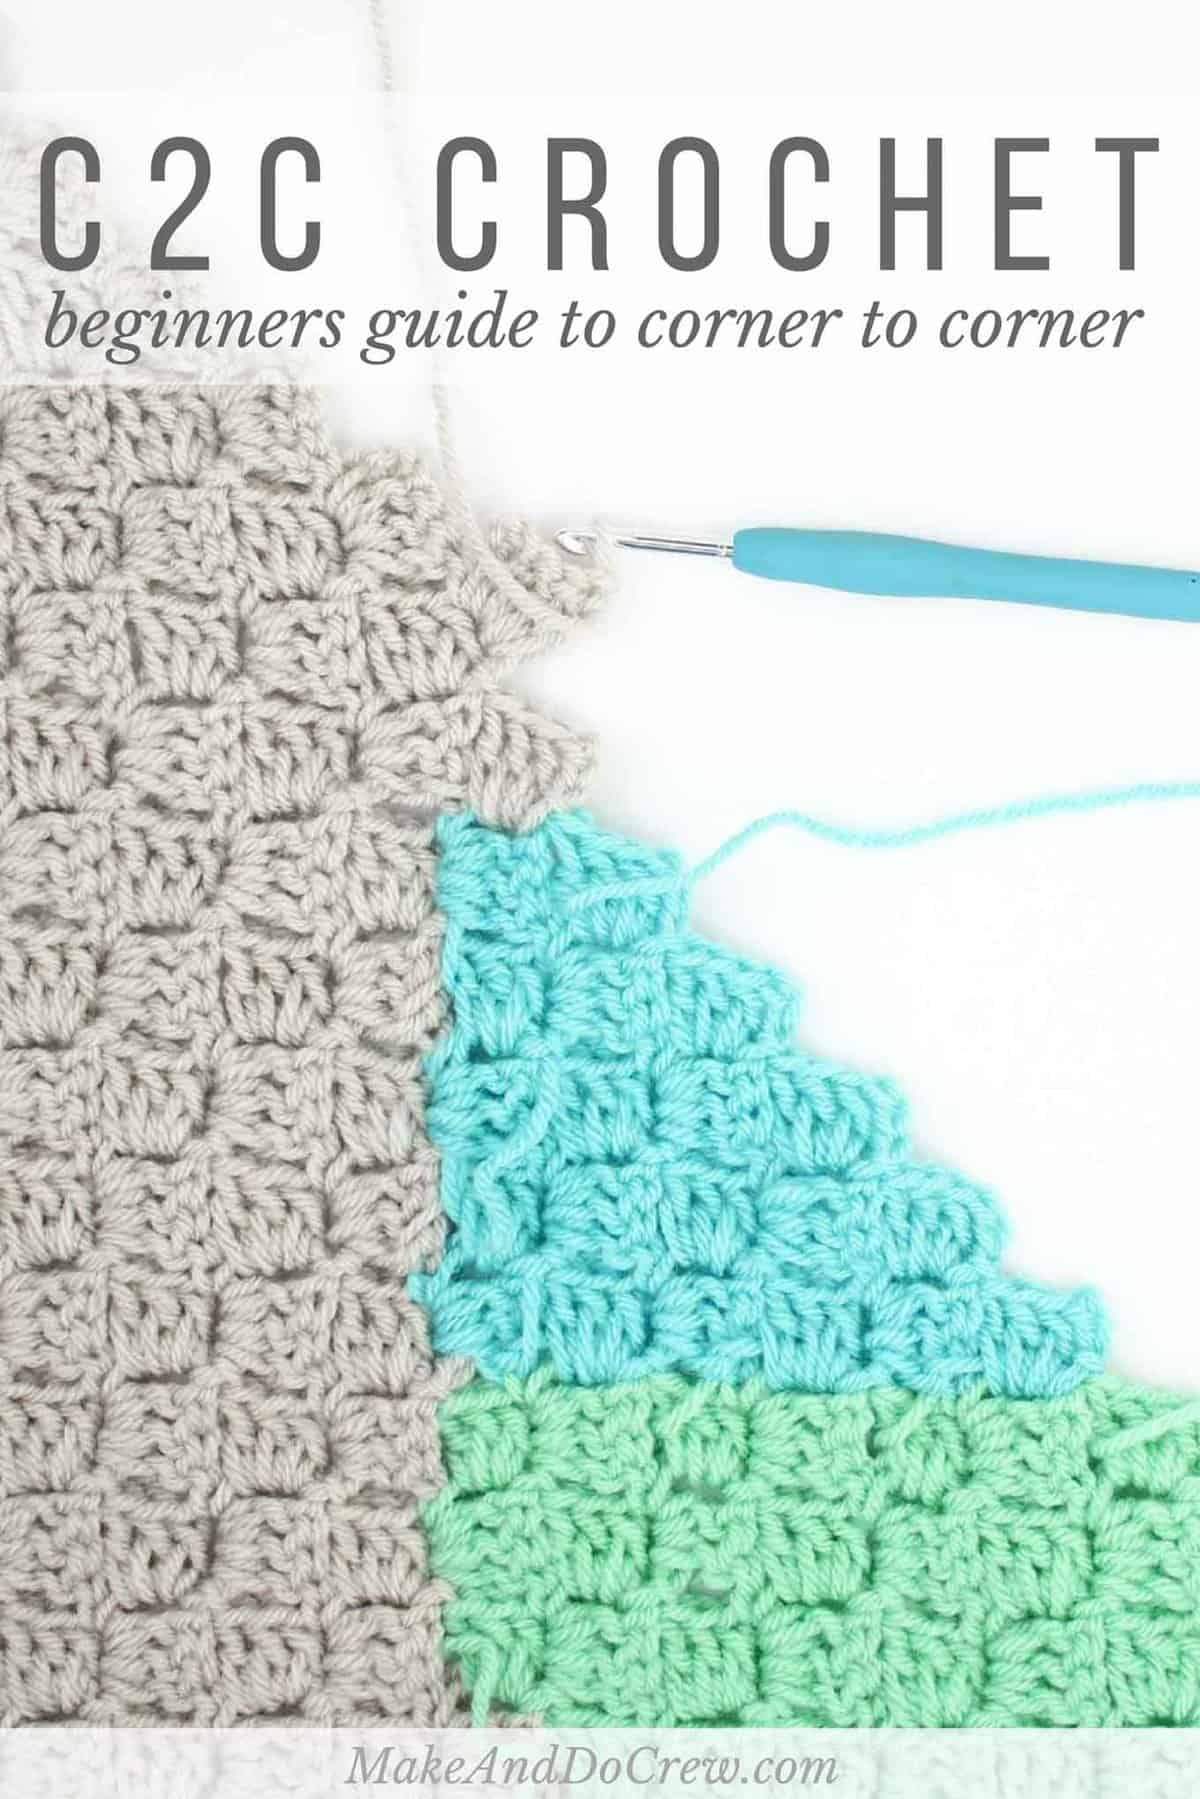 A close-up shot of a gray, teal, and green-colored corner-to-corner crochet blanket and a crochet hook on a white background.